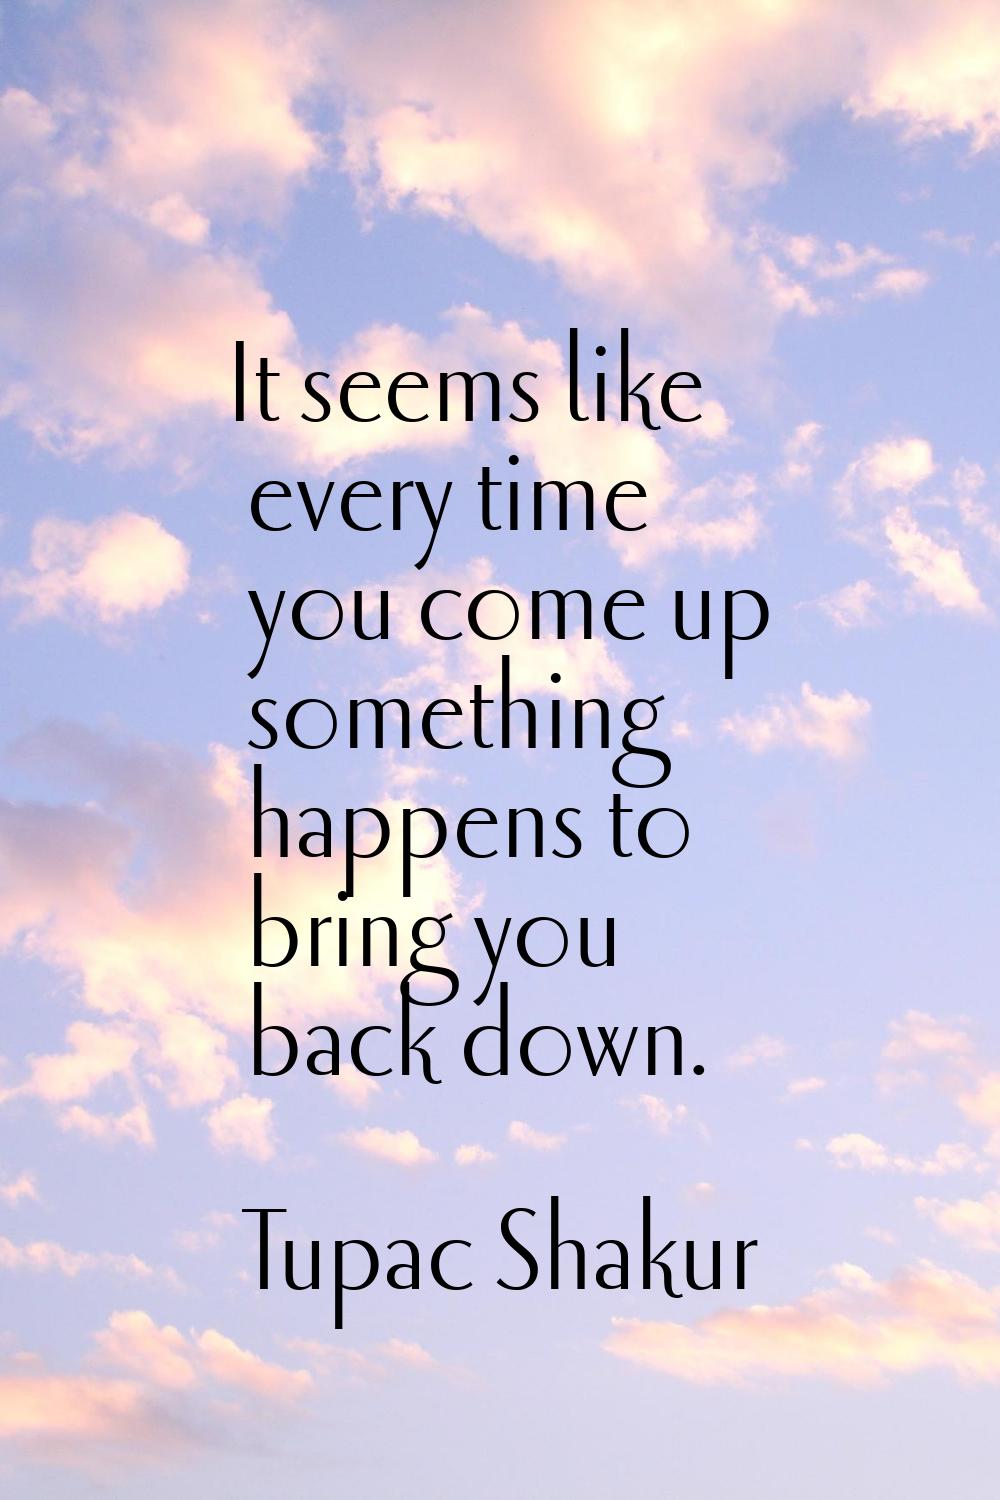 It seems like every time you come up something happens to bring you back down.